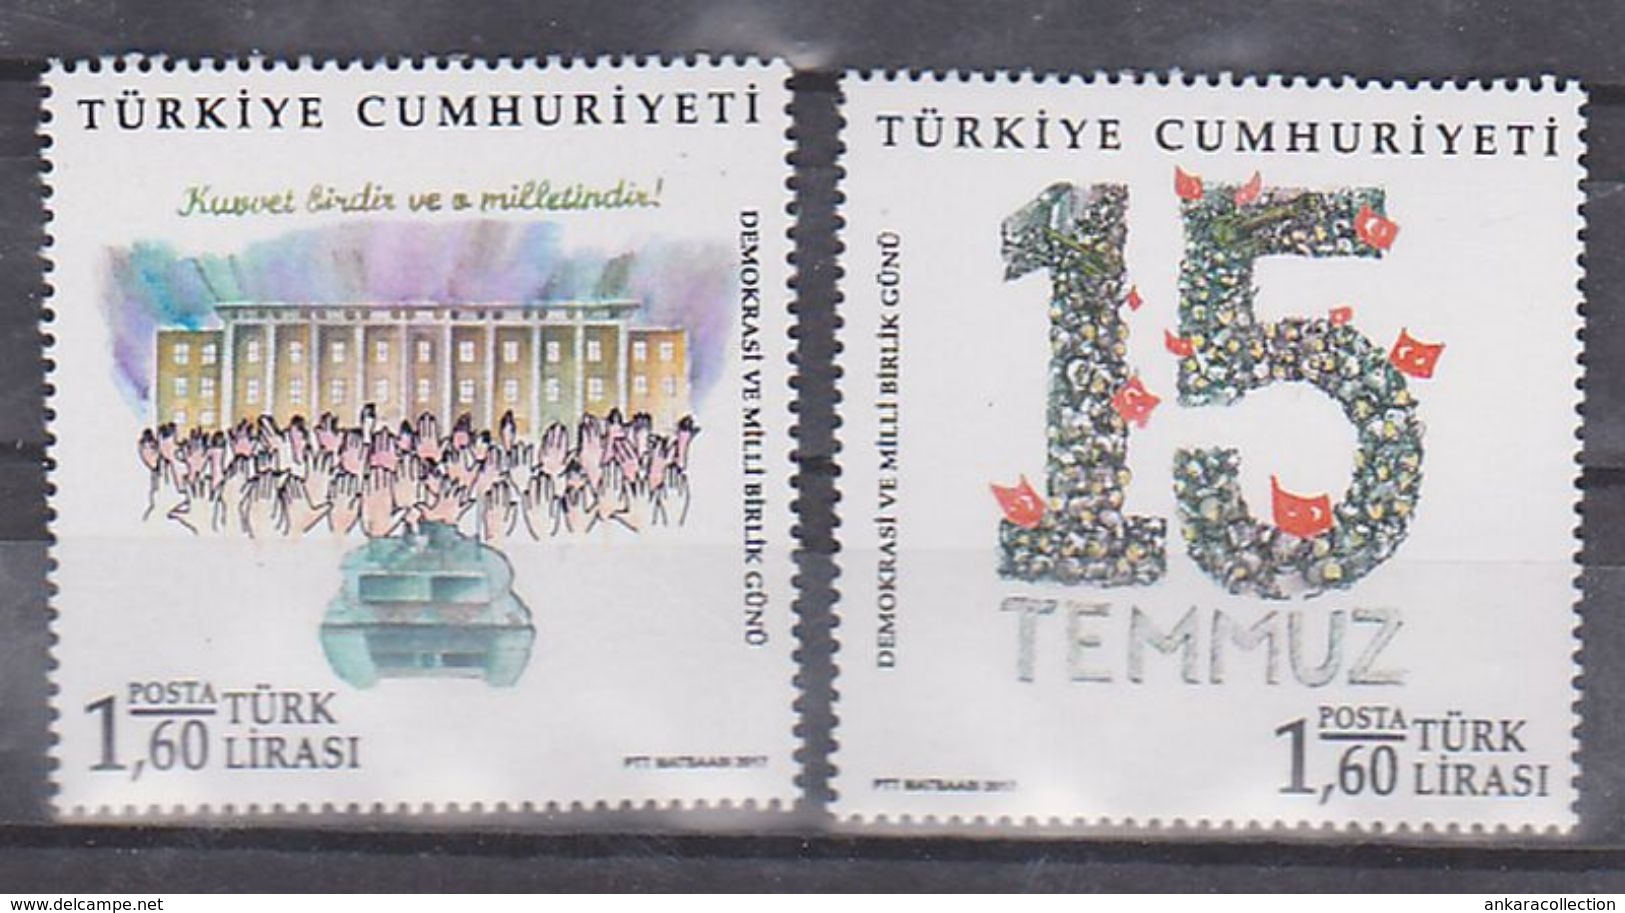 AC - TURKEY STAMP - DEMOCRACY AND NATIONAL SOLIDARITY DAY  MNH 15 JULY 2017 - Nuevos